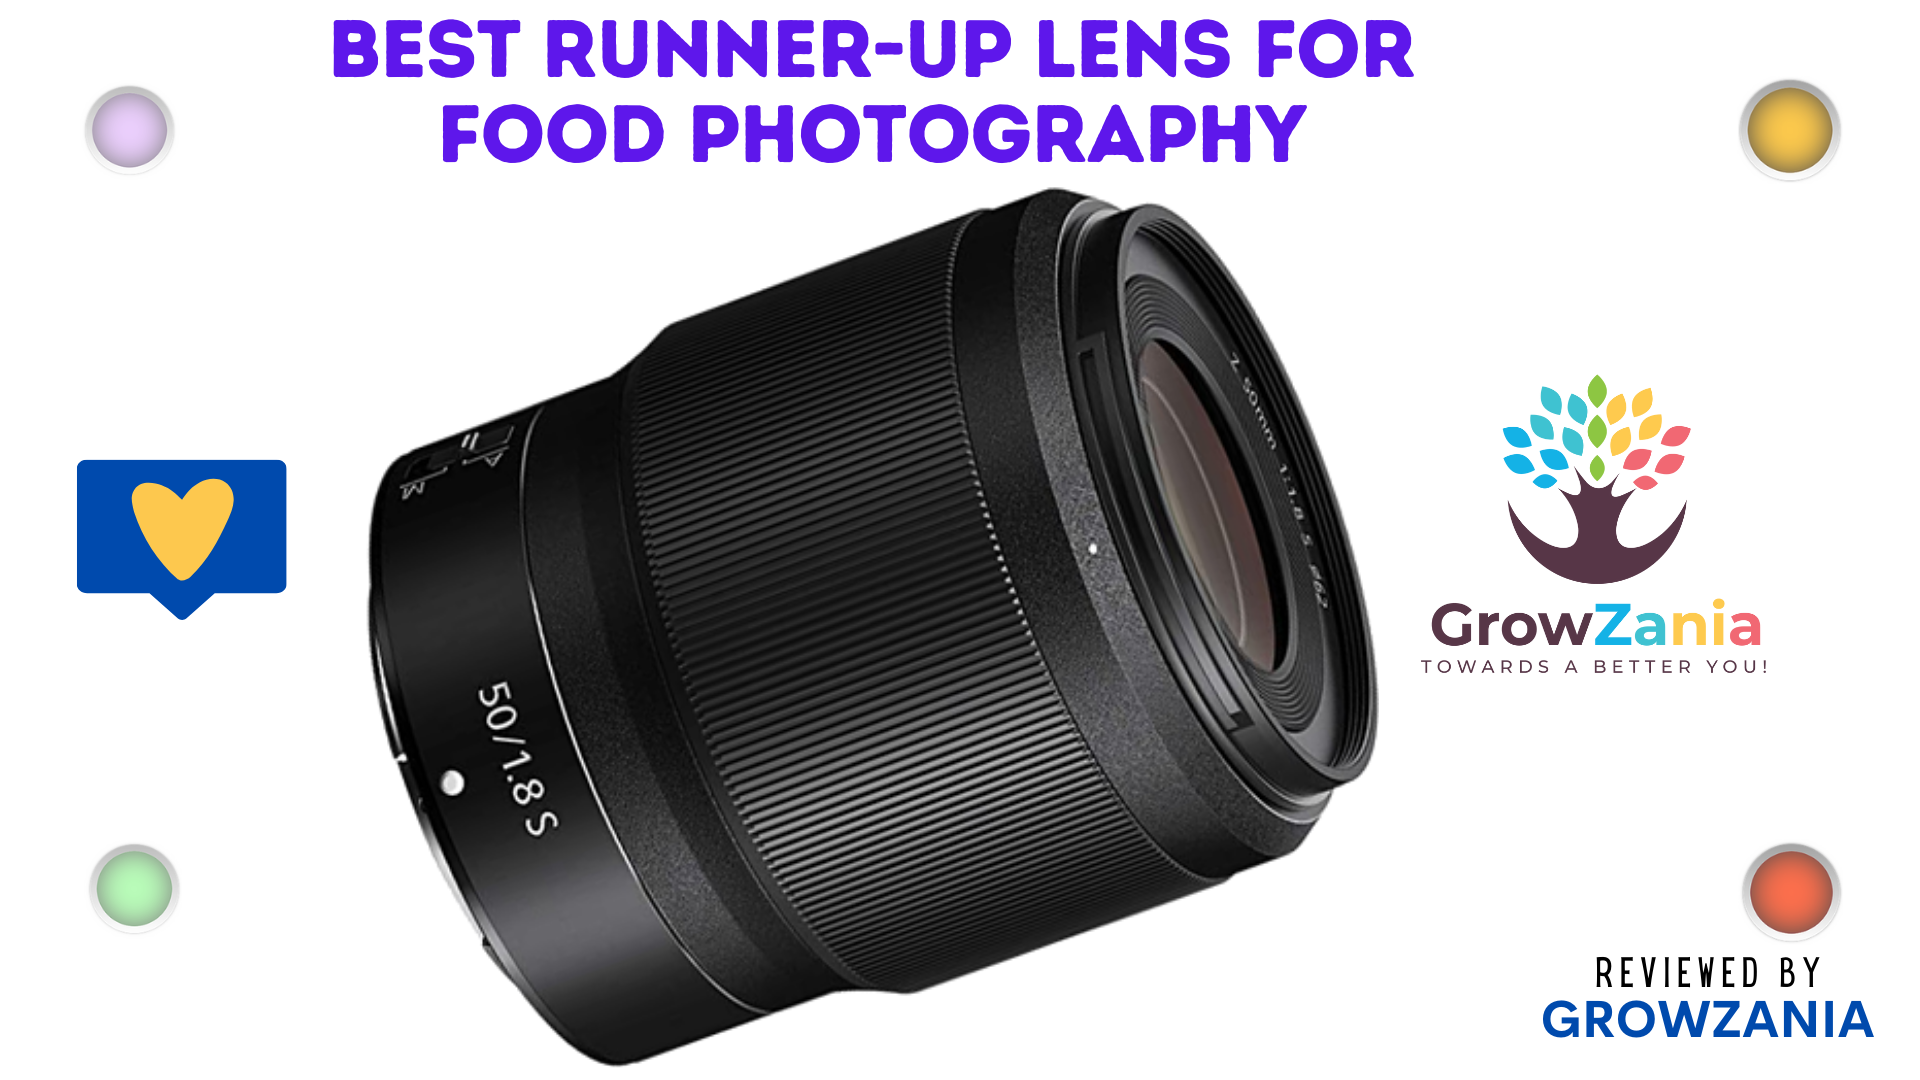 Best runner-up lens for food photography